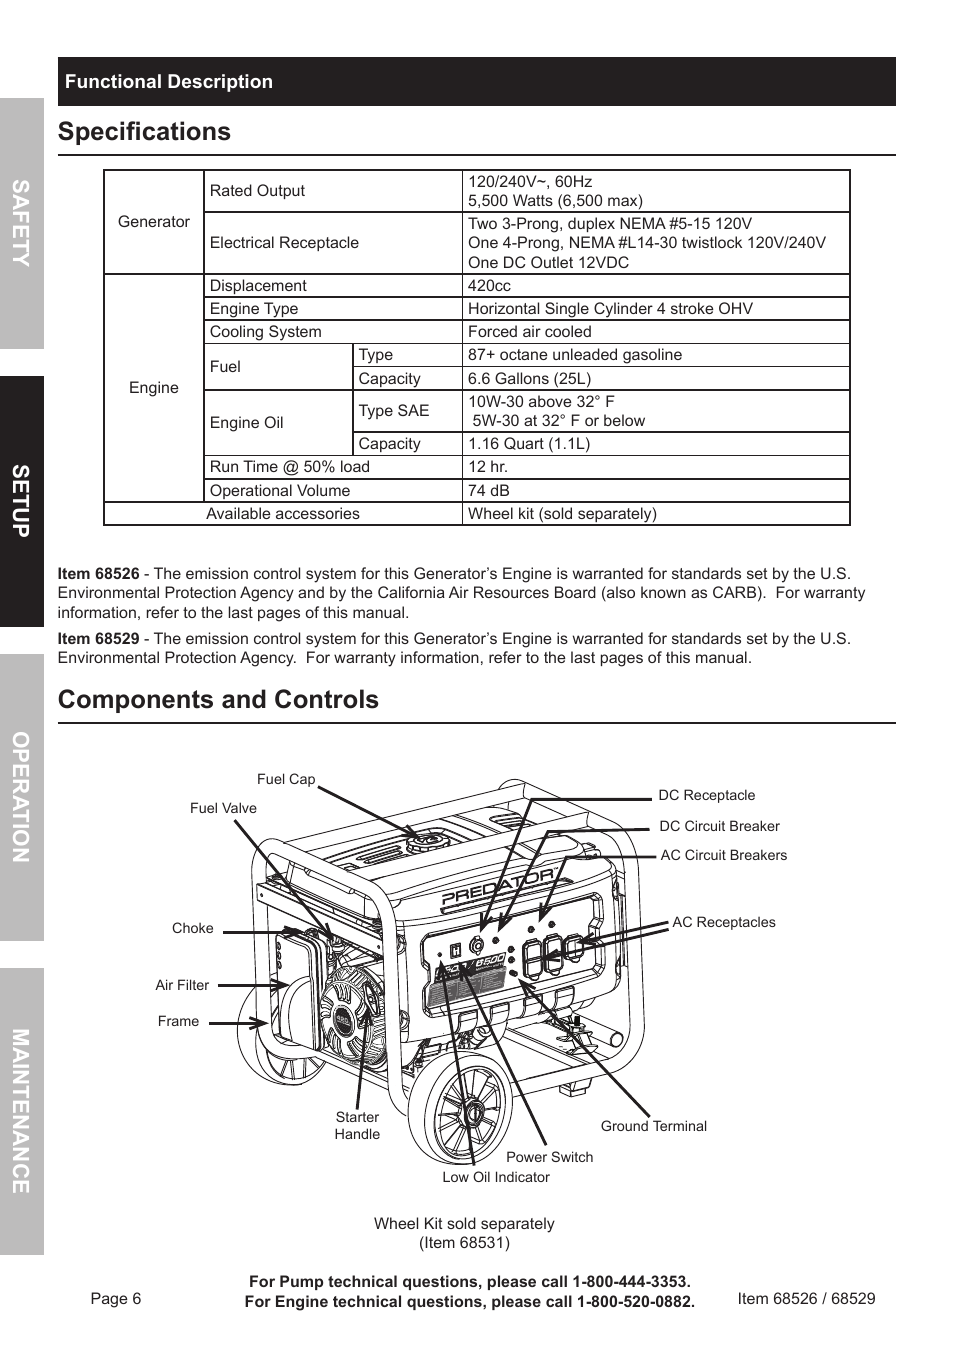 Specifications, Components and controls, Safety o pera tion m